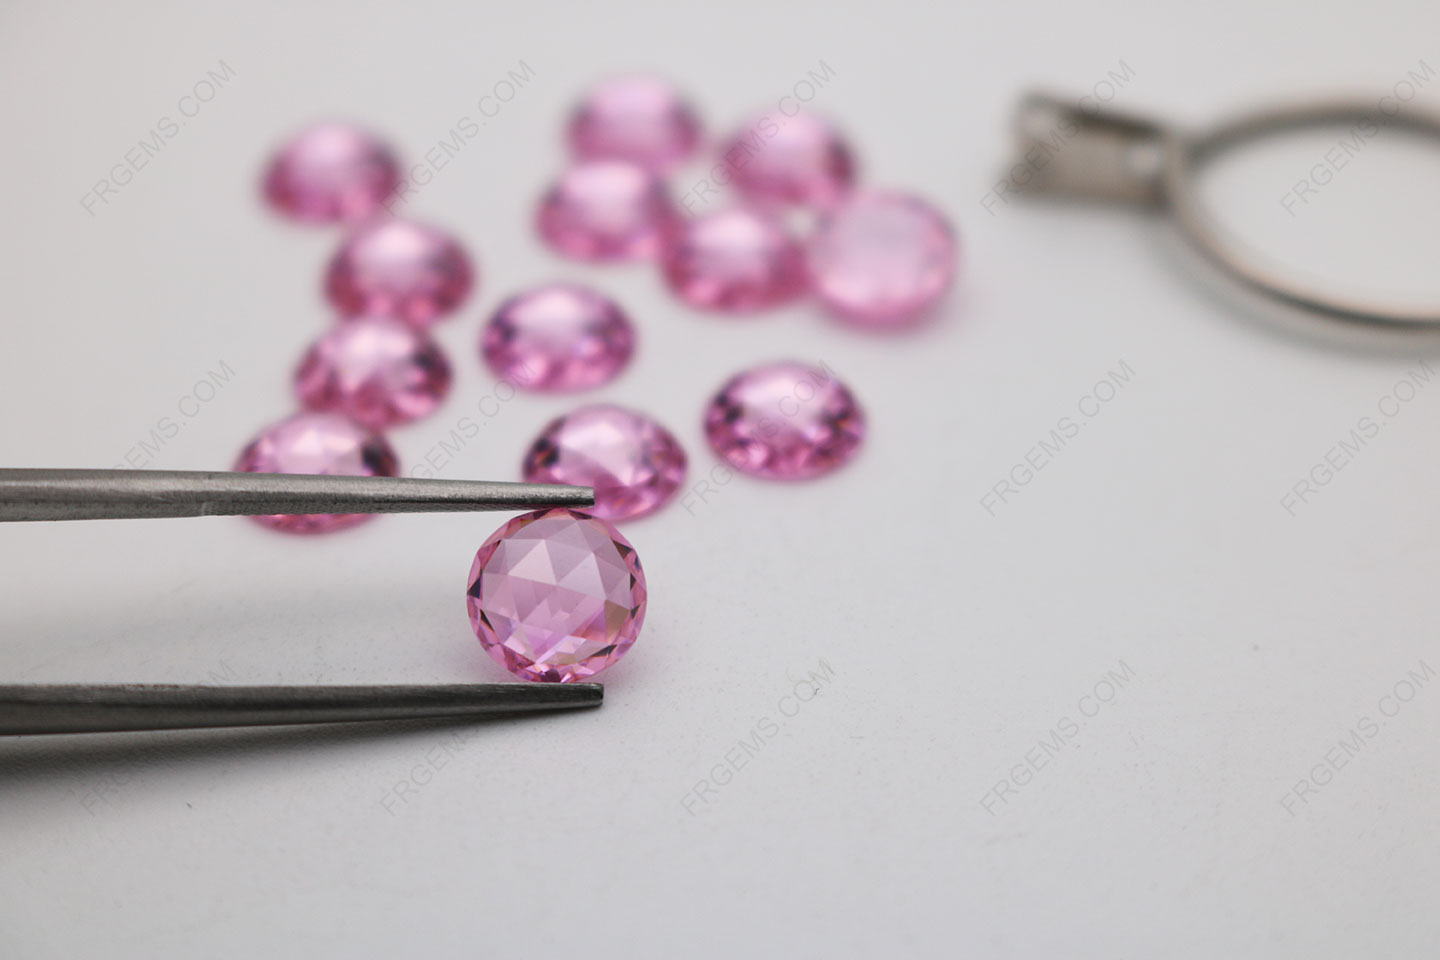 Cubic Zirconia Pink Round Shape Rose Cut Flat Bottom 8mm stones China Suppliers CZ03 IMG_2066